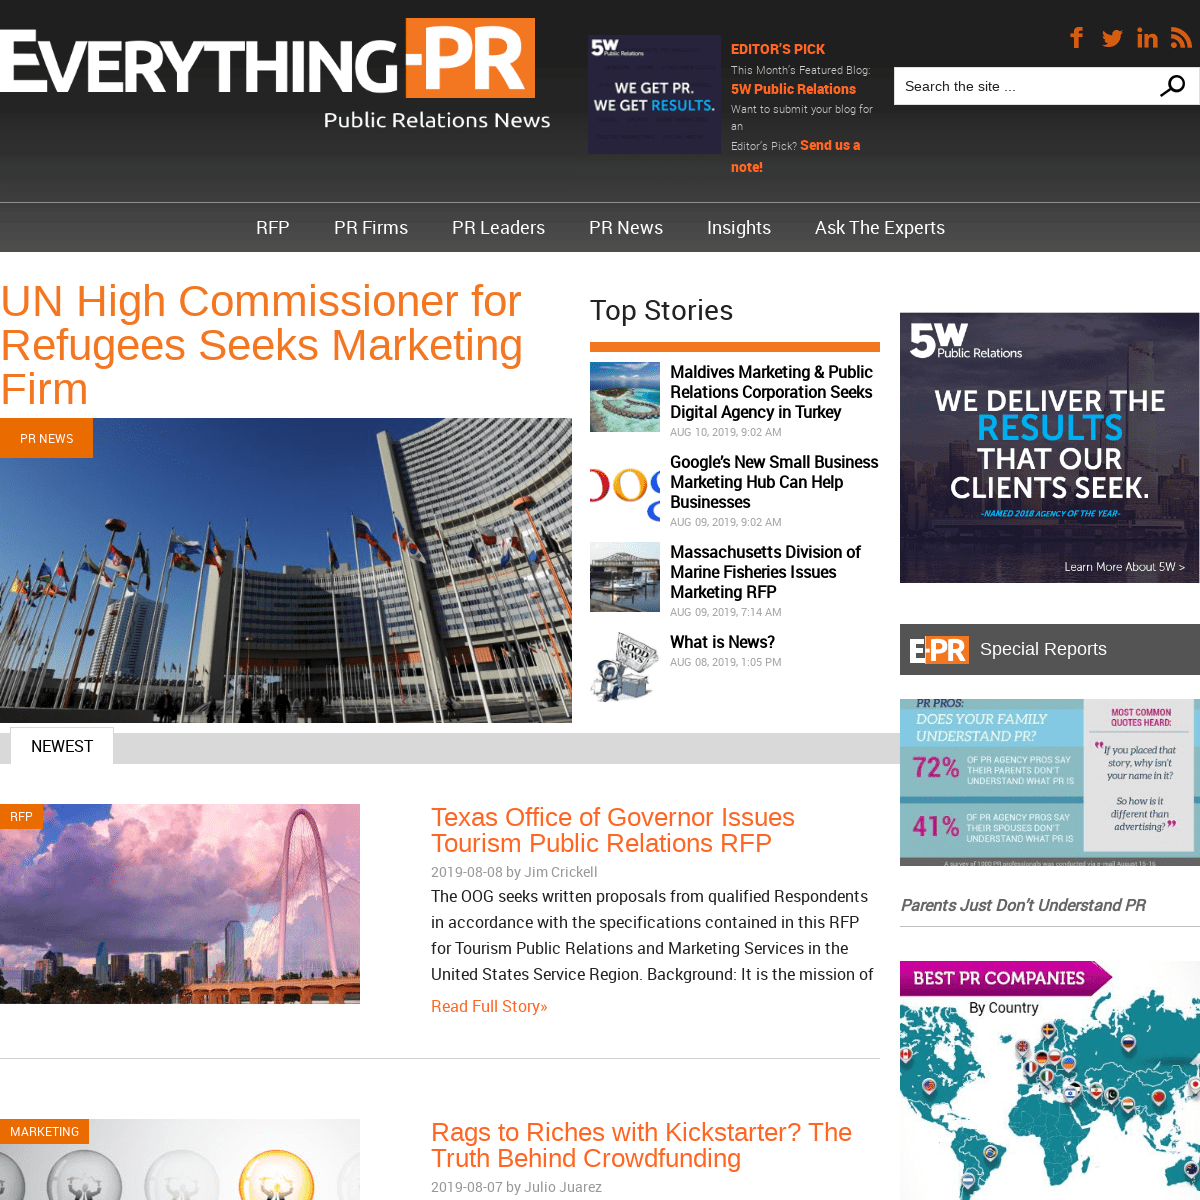 PR News: Public Relations, Marketing and Social Media Today | Everything PR